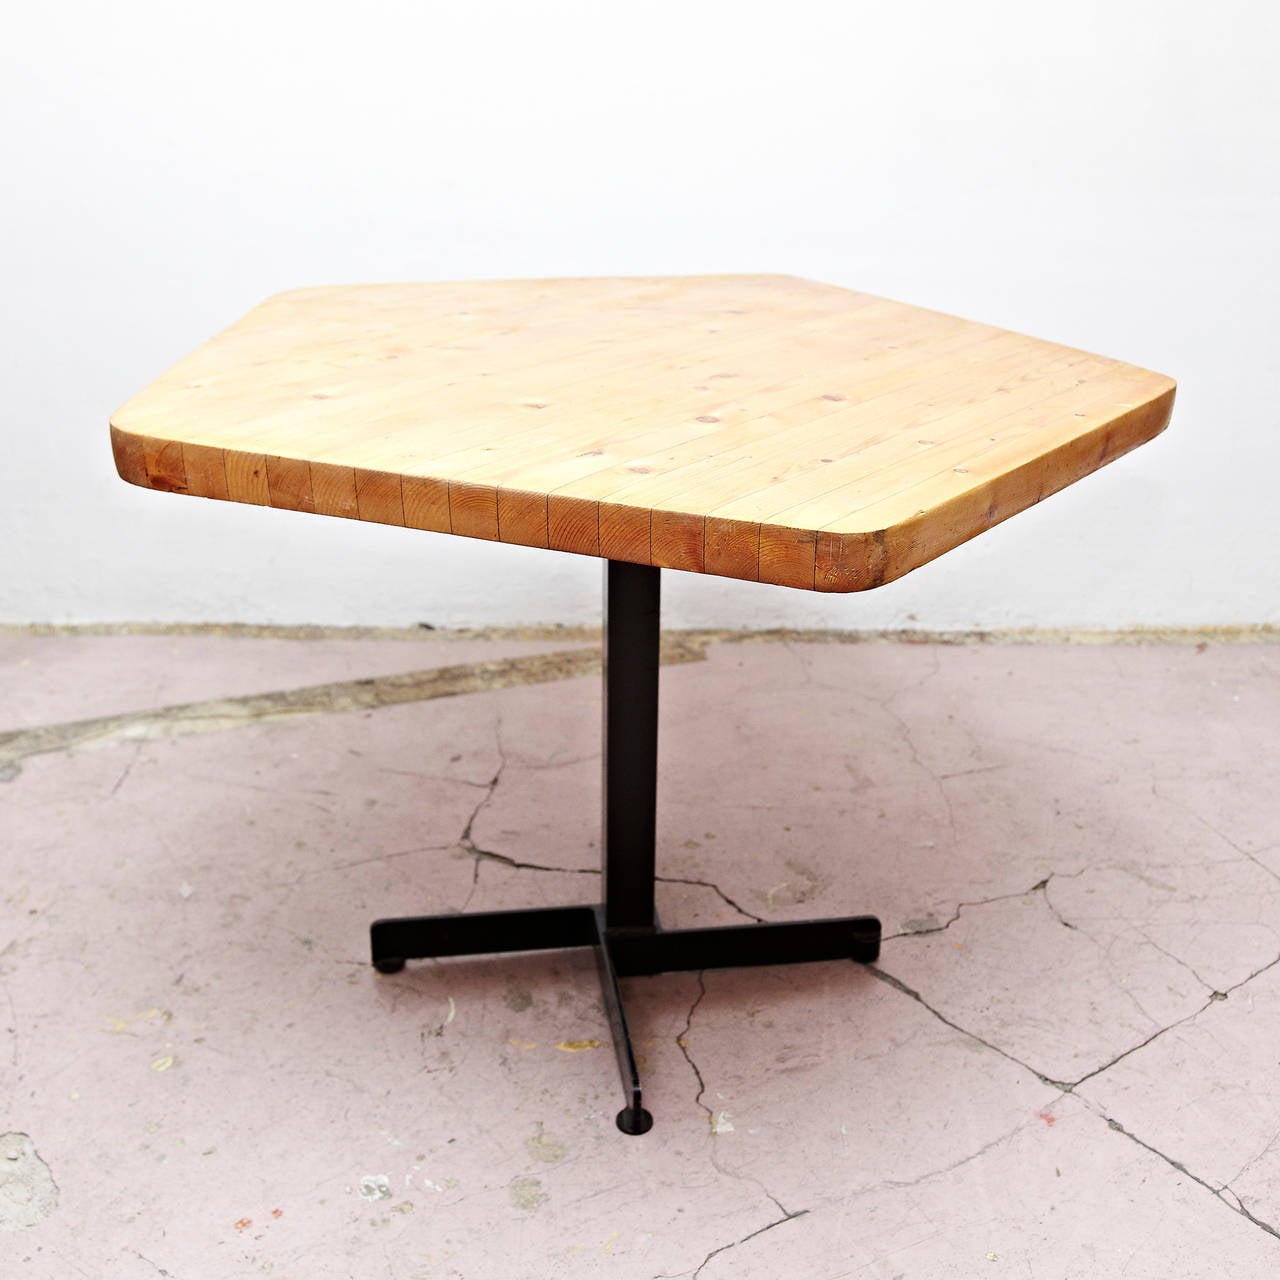 Pentagonal dinning table designed by Charlotte Perriand for Les Arcs ski Resort around 1960, manufactured in France. 
Lacquered metal base, pine wood table top. 

In good original condition, with minor wear consistent with age and use, preserving